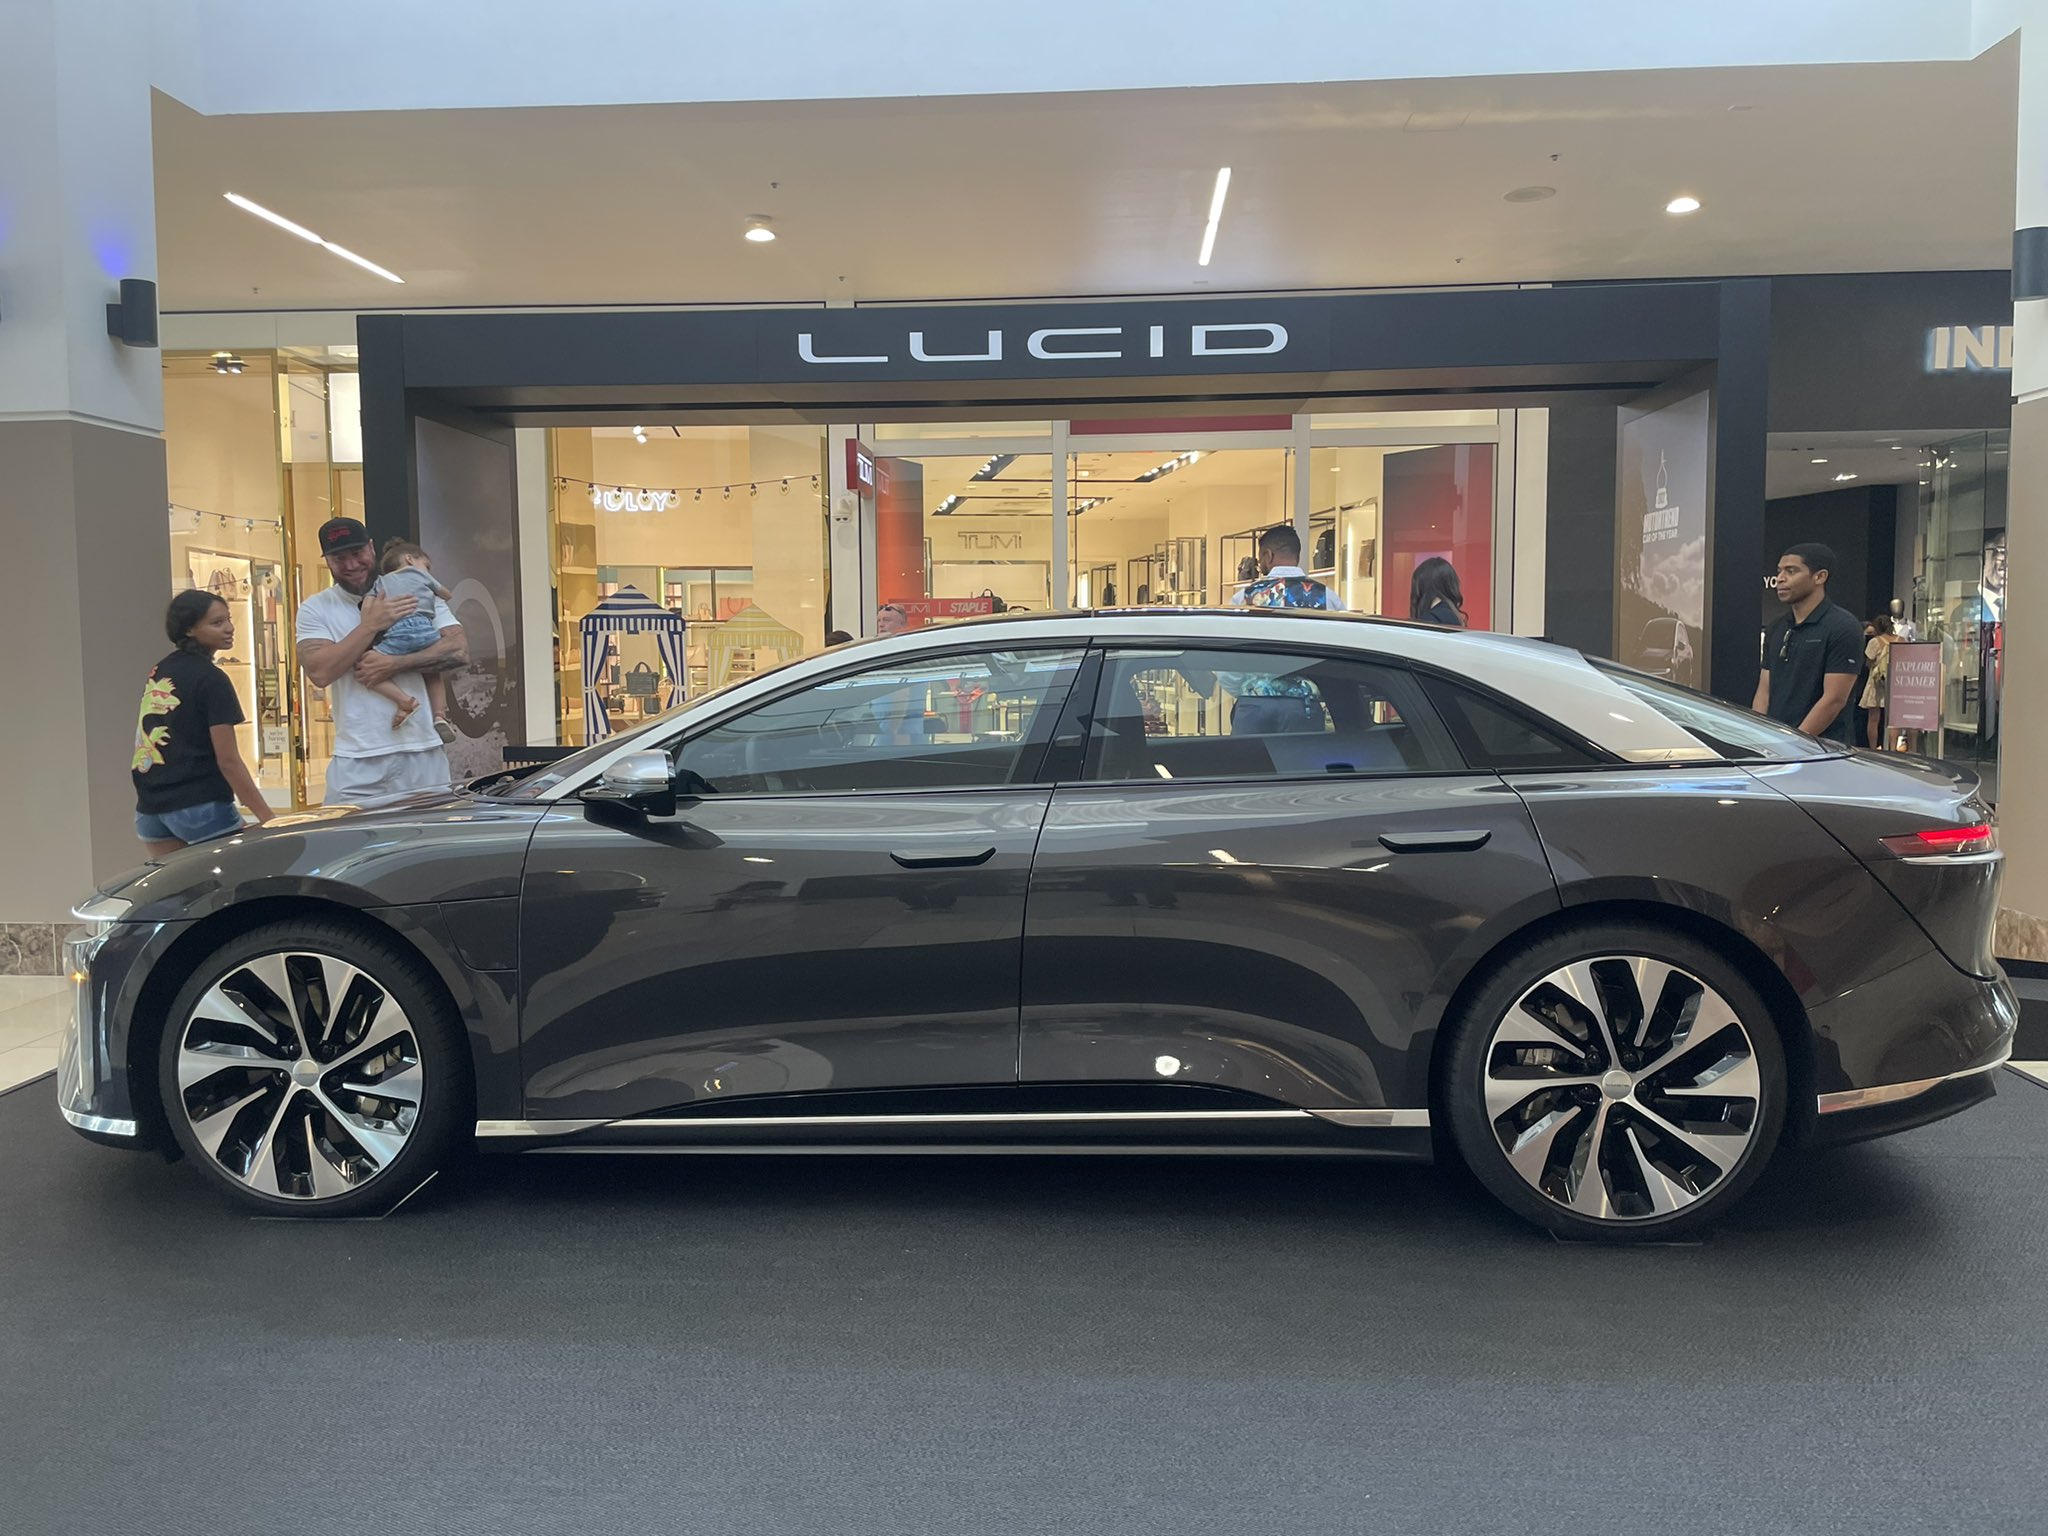 Lucid coming soon at the Cherry Creek mall in Denver Colorado. : r/CCIV